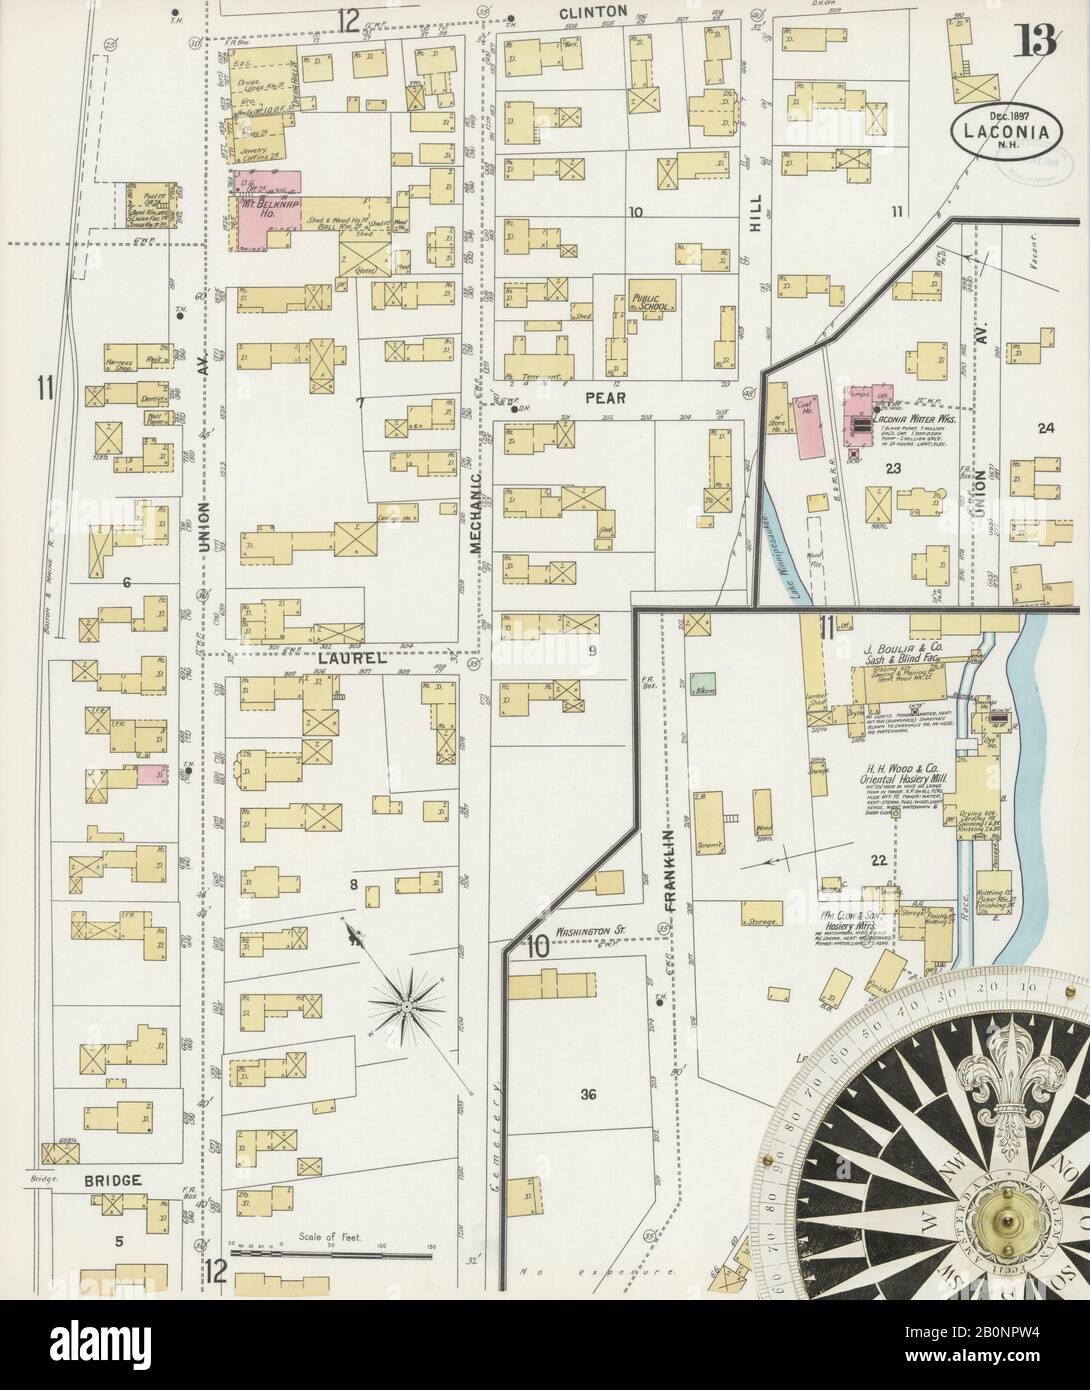 Image 13 of Sanborn Fire Insurance Map from Laconia, Belknap County, New Hampshire. Dec 1897. 13 Sheet(s), America, street map with a Nineteenth Century compass Stock Photo